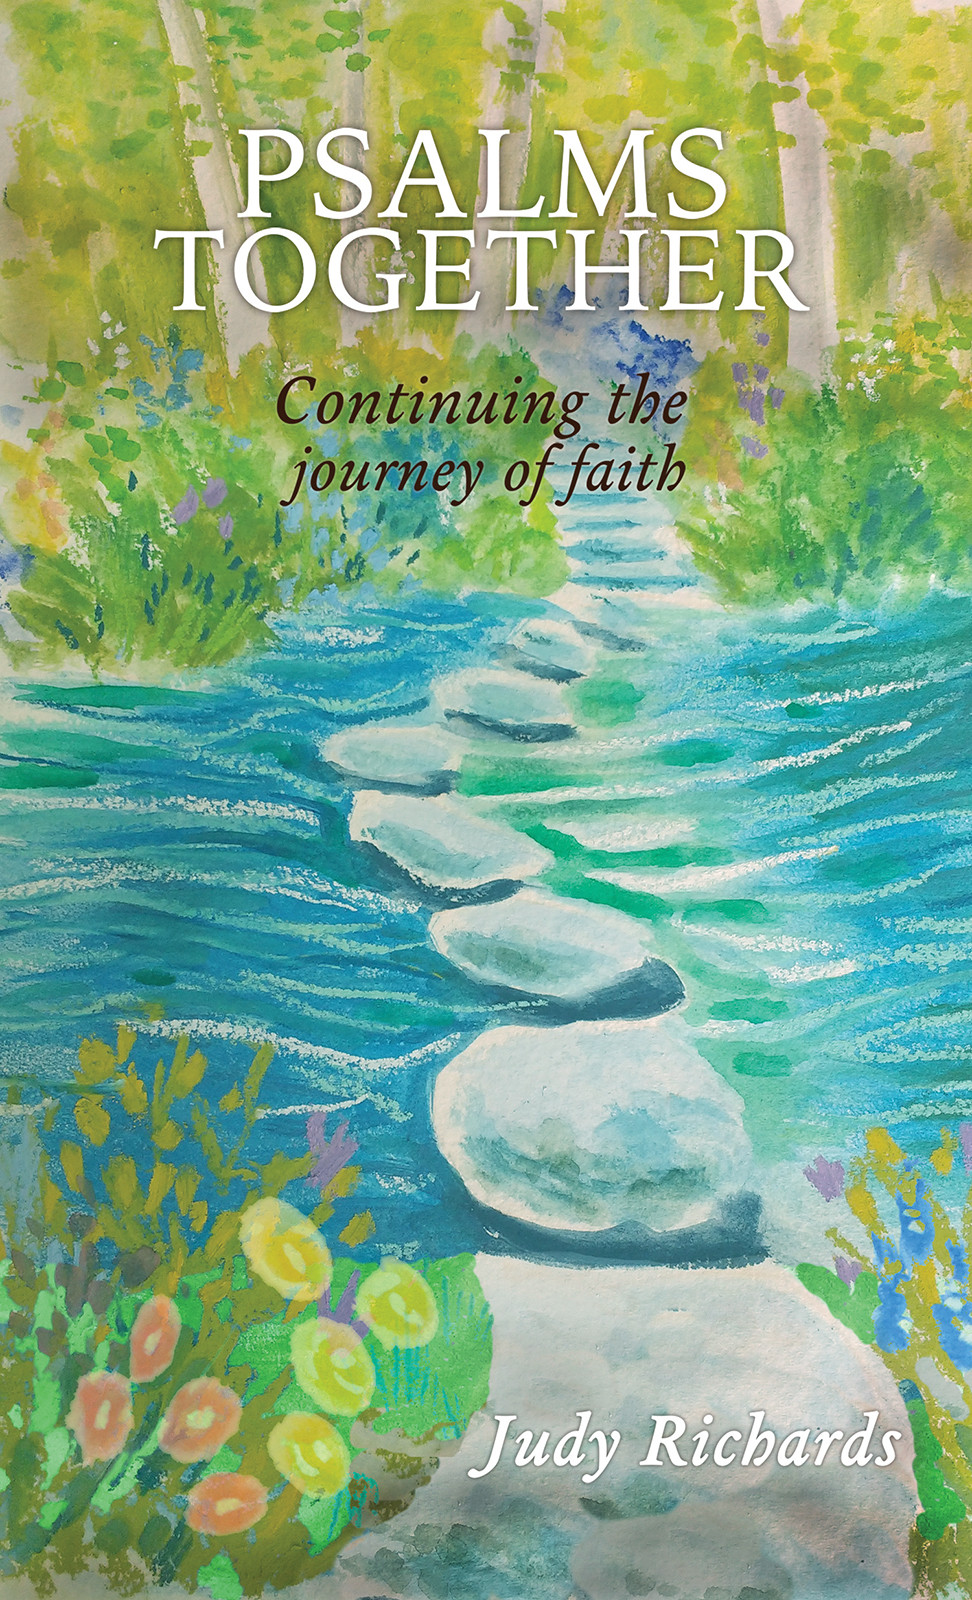 Psalms Together: Continuing the Journey of Faith-bookcover